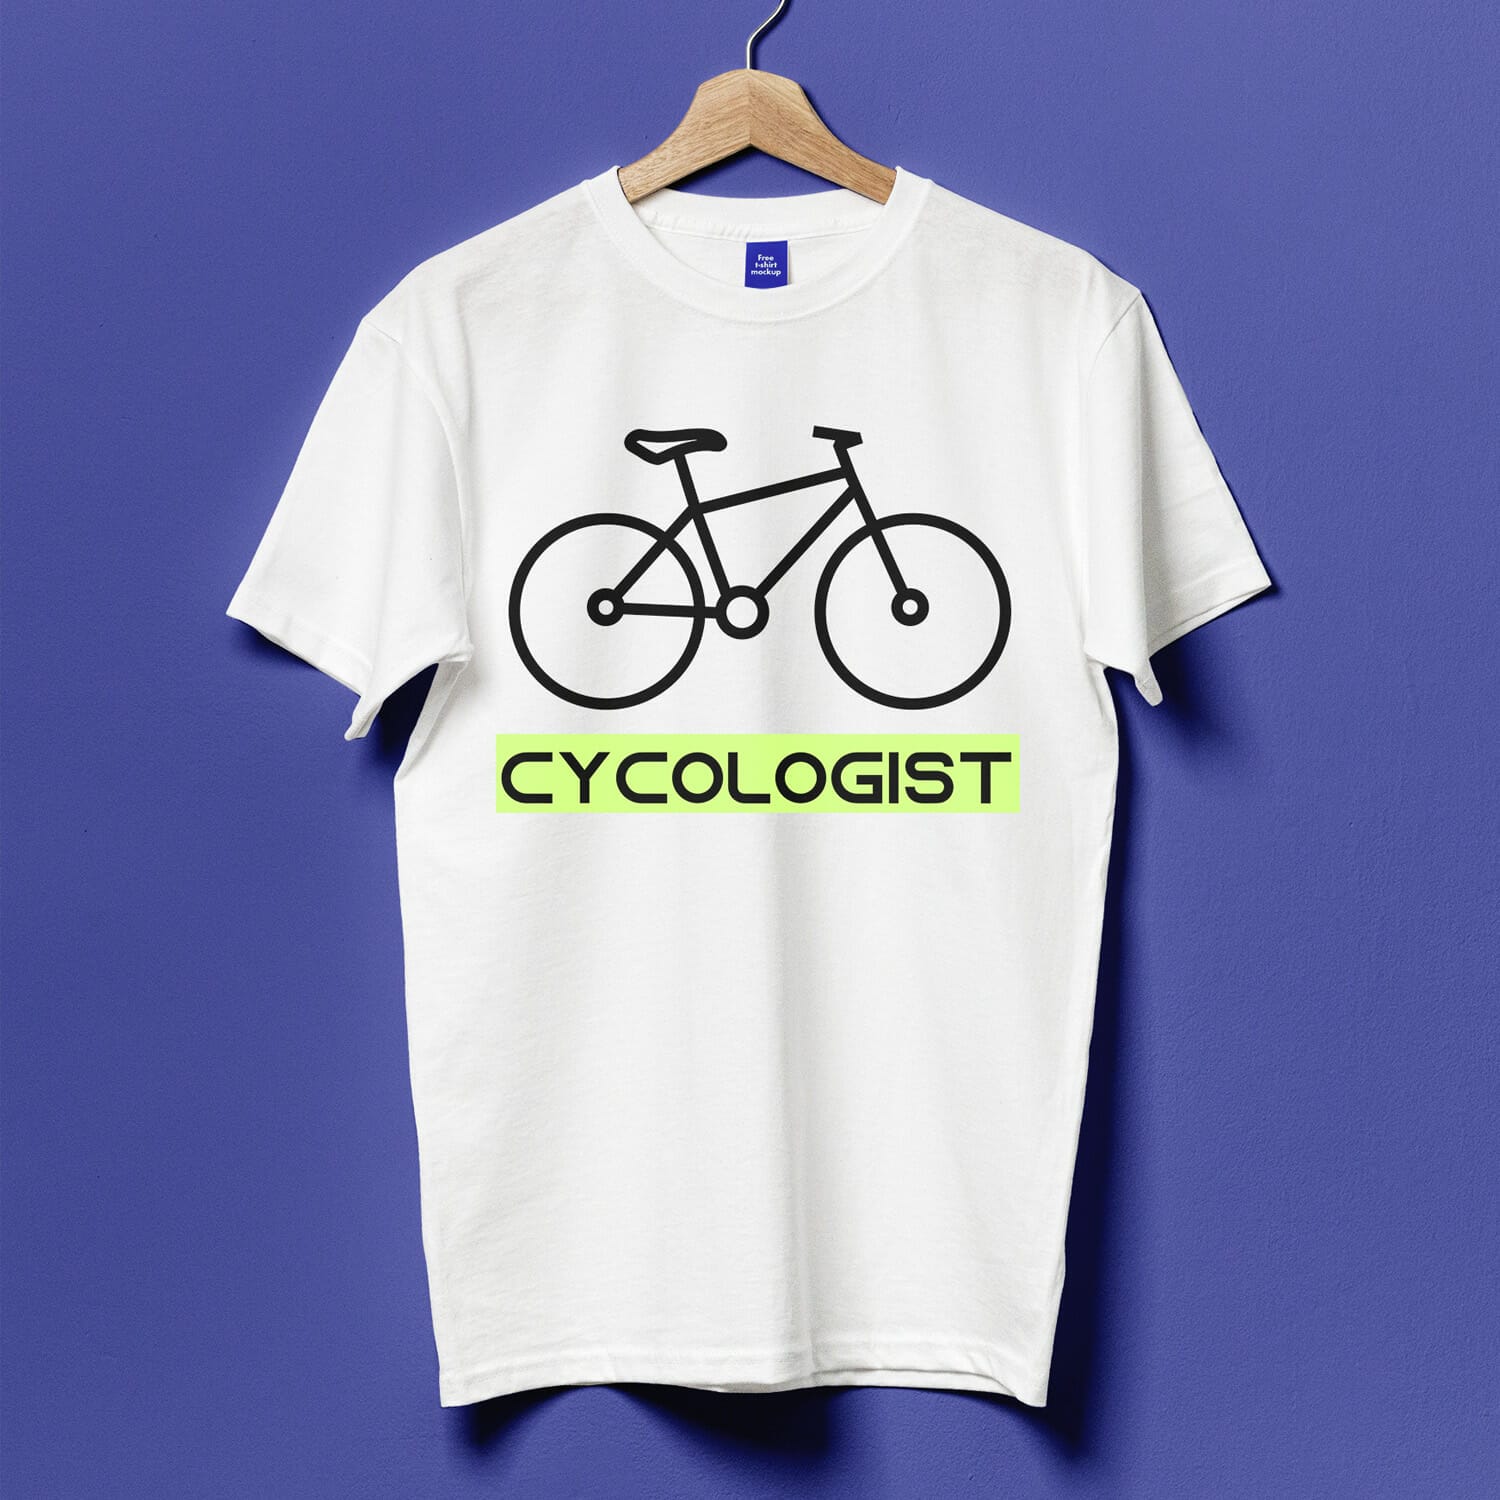 Cycologist T-shirt Design For Cyclists